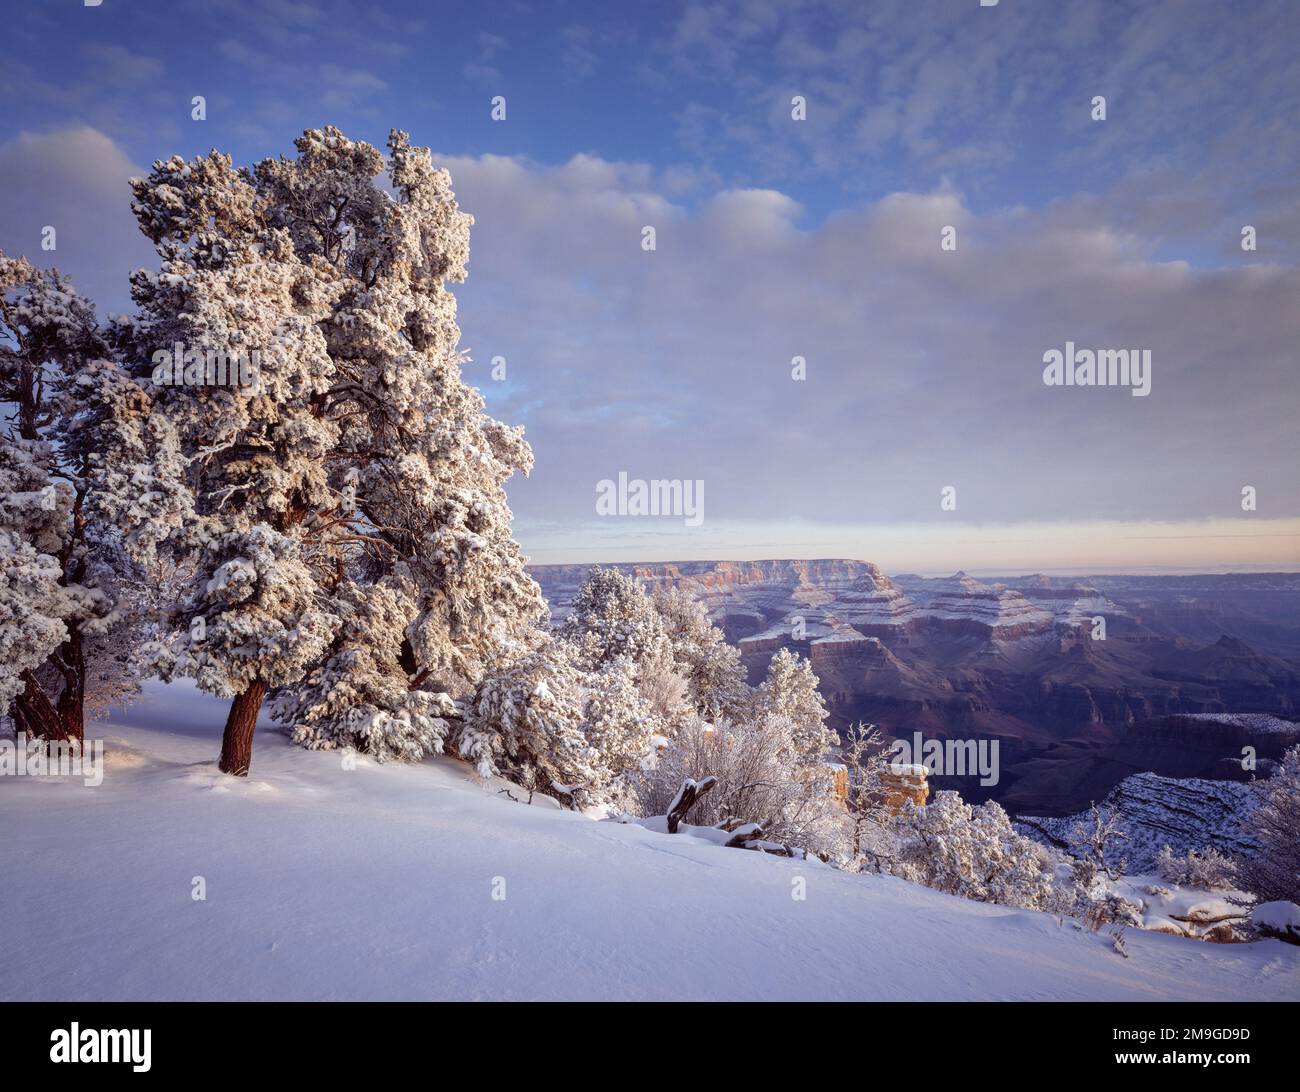 Pinyon pine trees covered in snow in winter, South Rim, Grand Canyon National Park, Arizona, USA Stock Photo